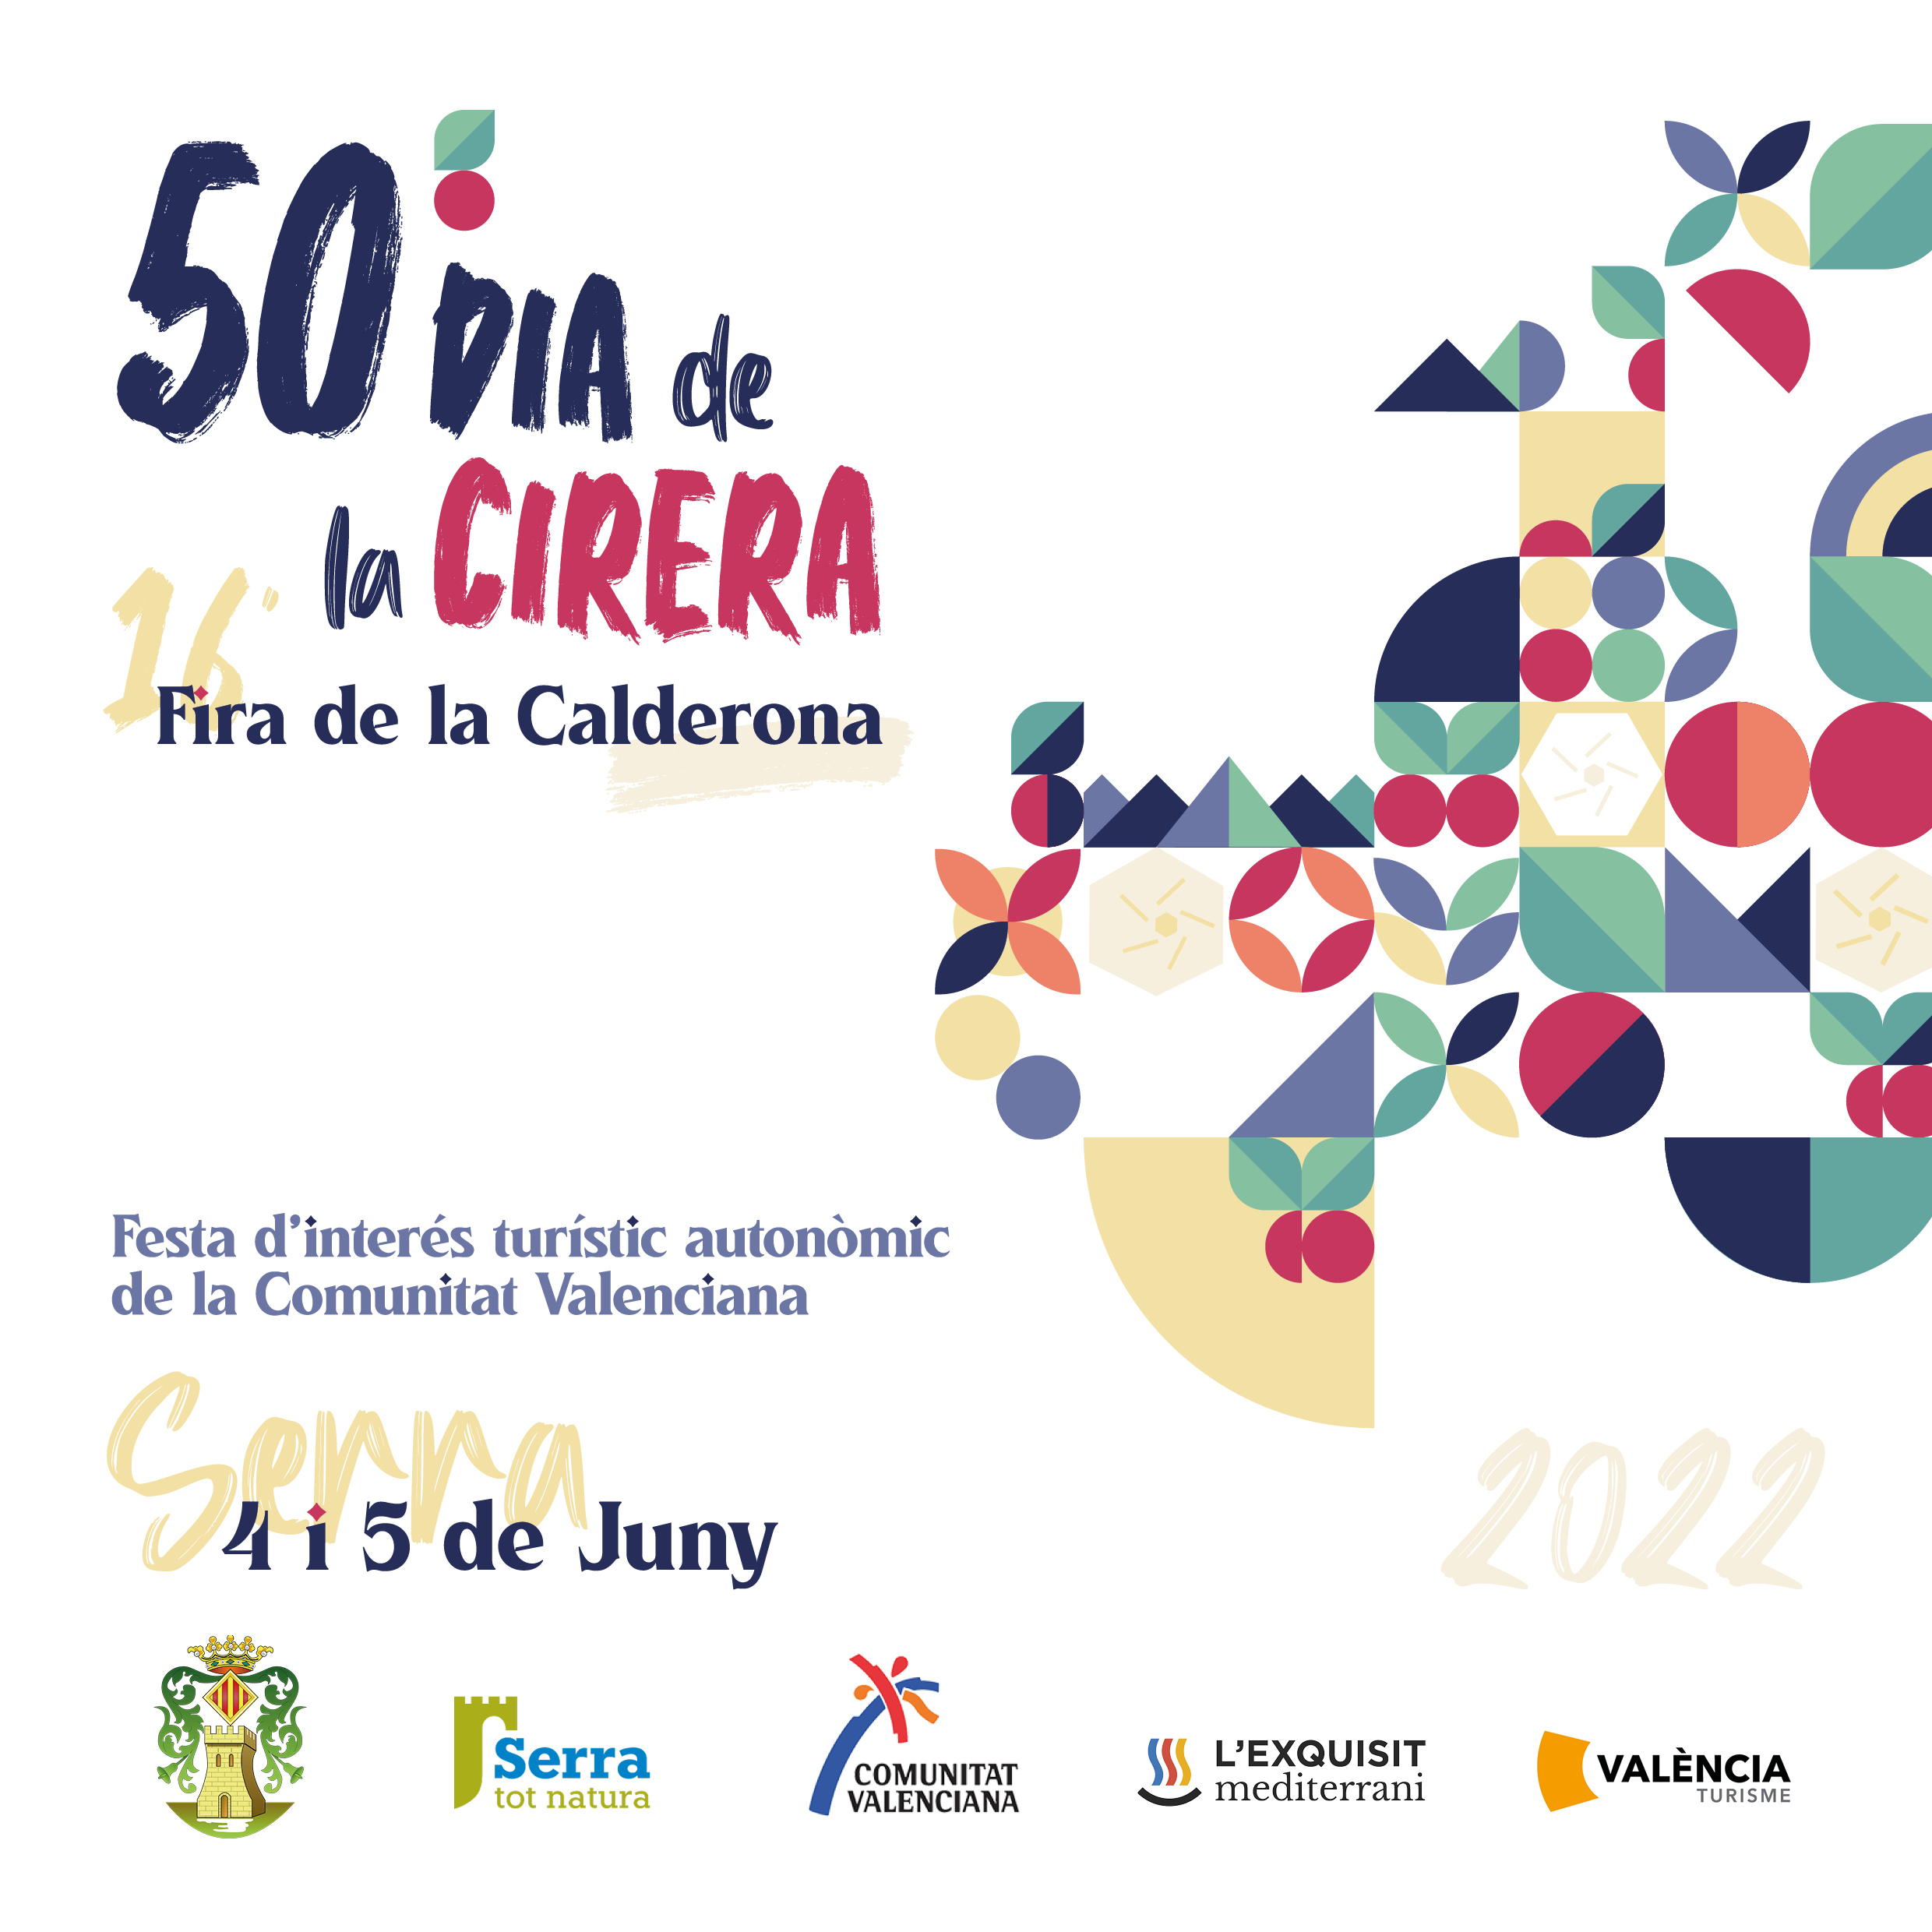 You are currently viewing Program of the 16th Fira de la Calderona 50th day of the Cirera